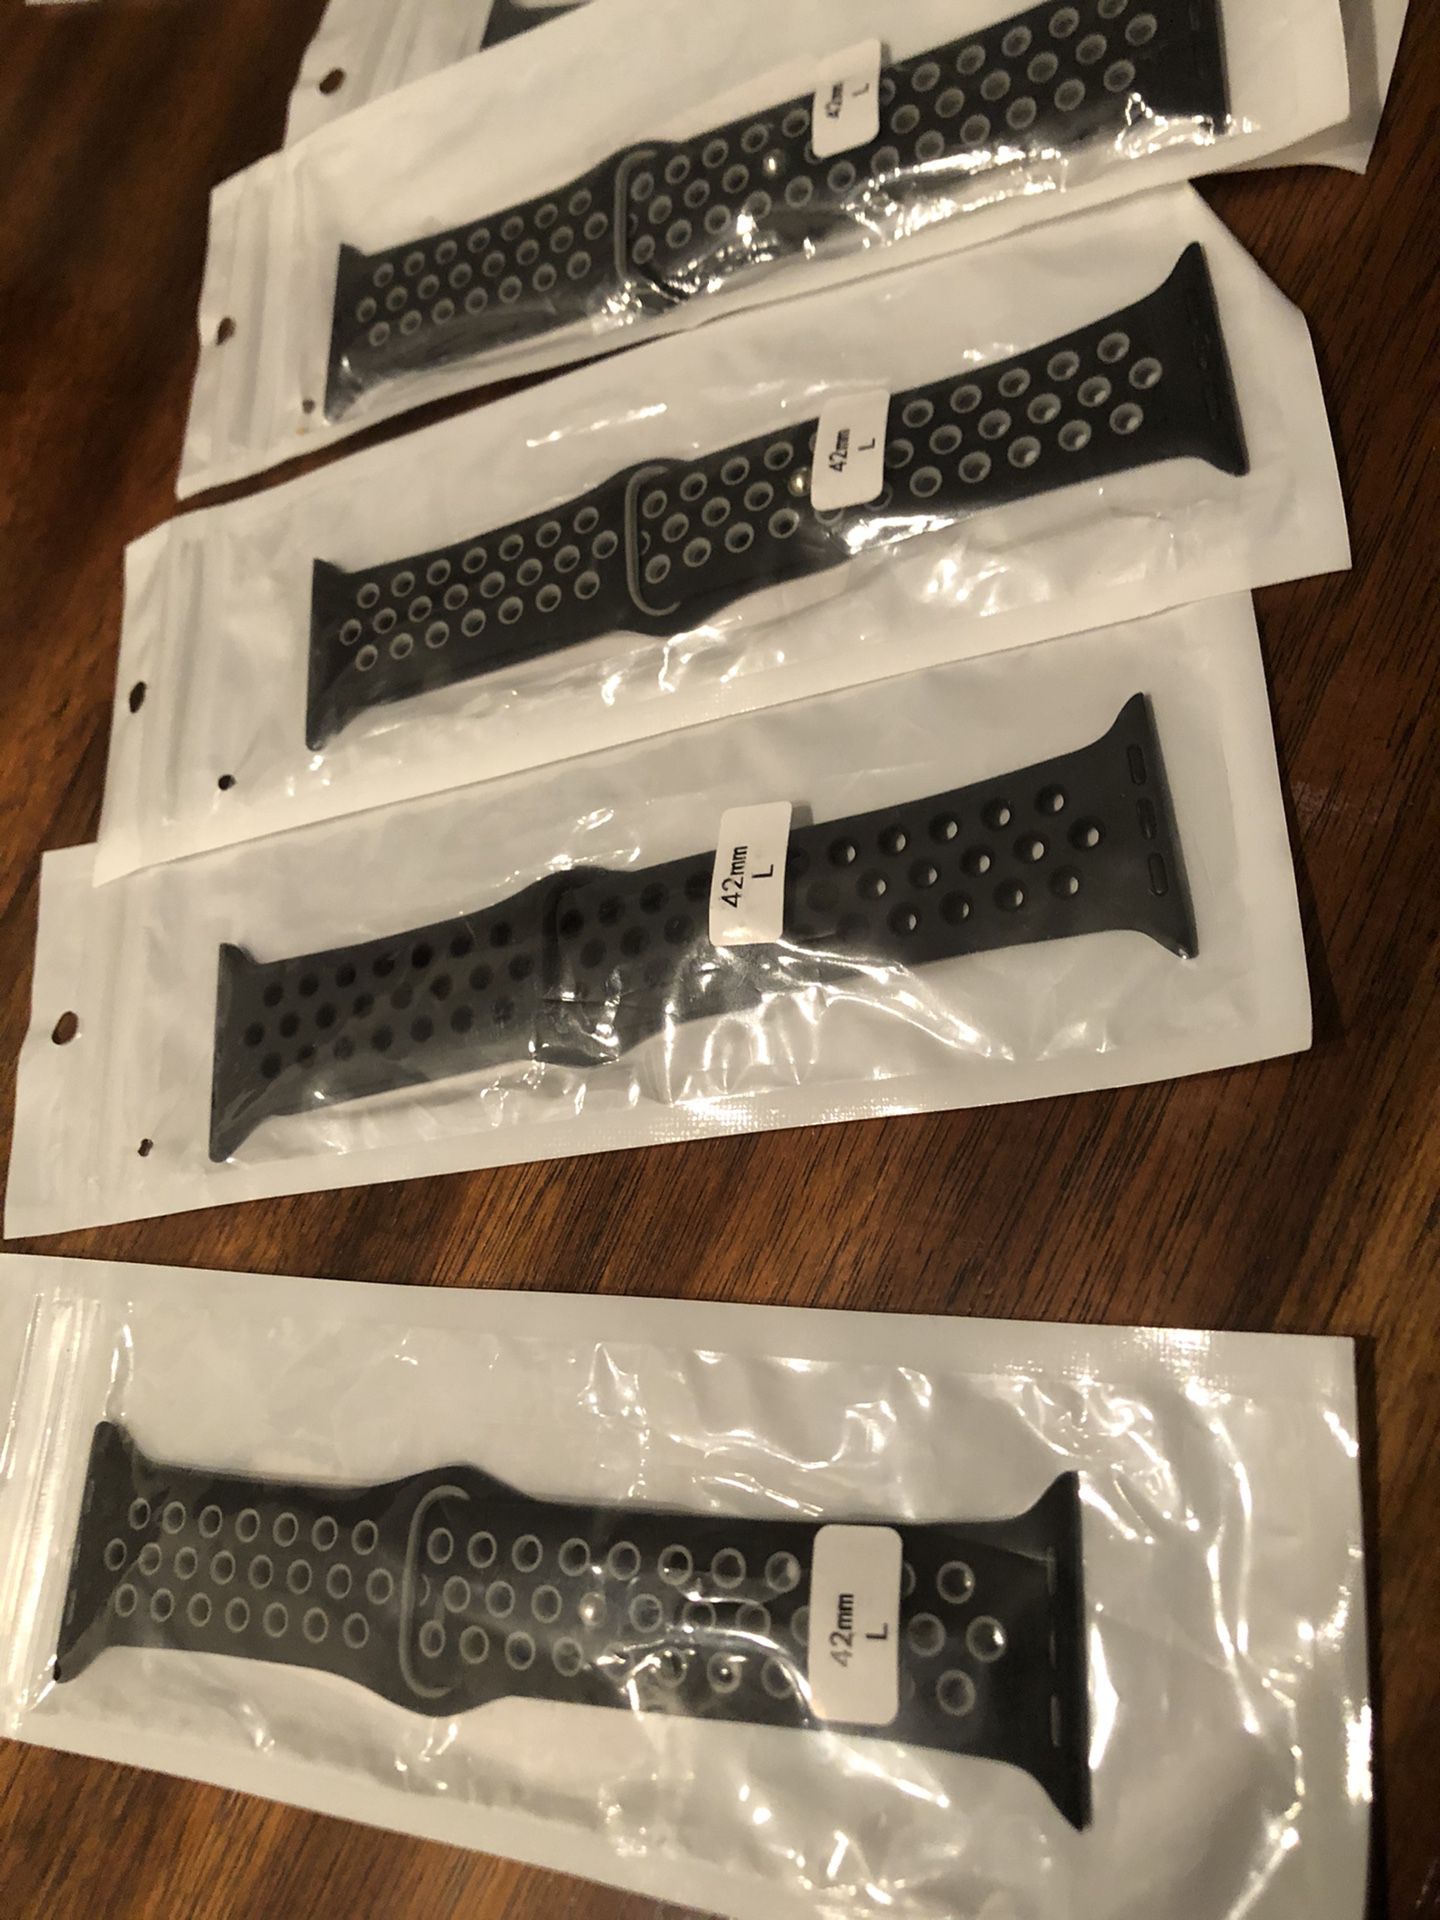 Apple Watch silicon bands brand new 100pcs-2$ each 🔥súper offer 🔥